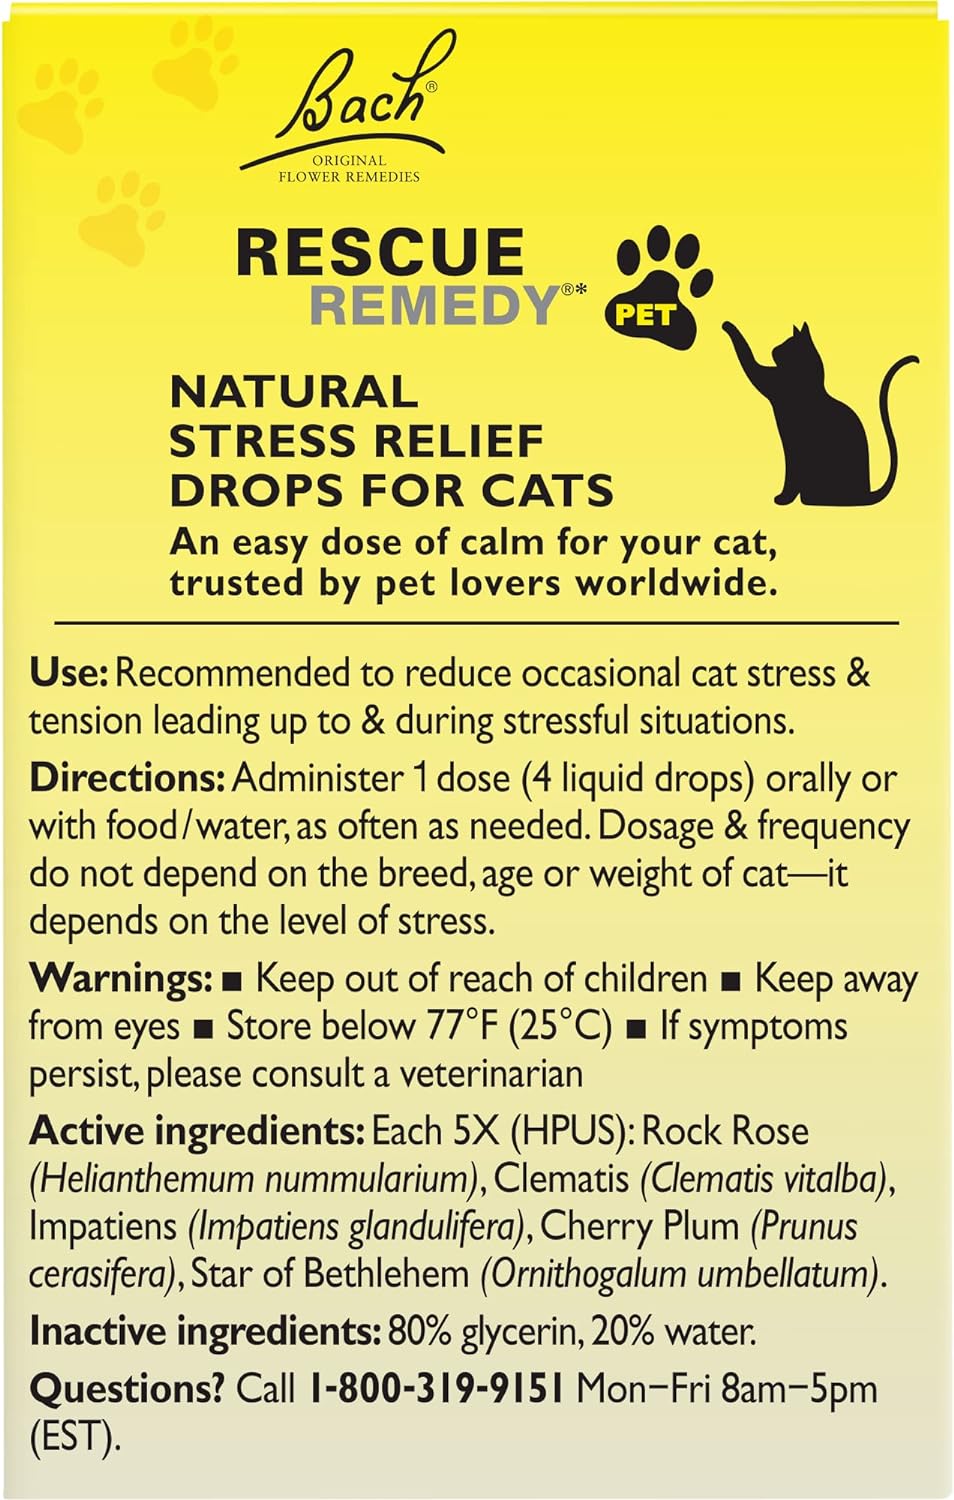 Bach RESCUE REMEDY PET for Cats 10mL, Natural Calming Drops, Stress Relief for Cats & Kittens Caused by Loud Noises, Travel, New Pets & People, Homeopathic Flower Remedy : Pet Supplies